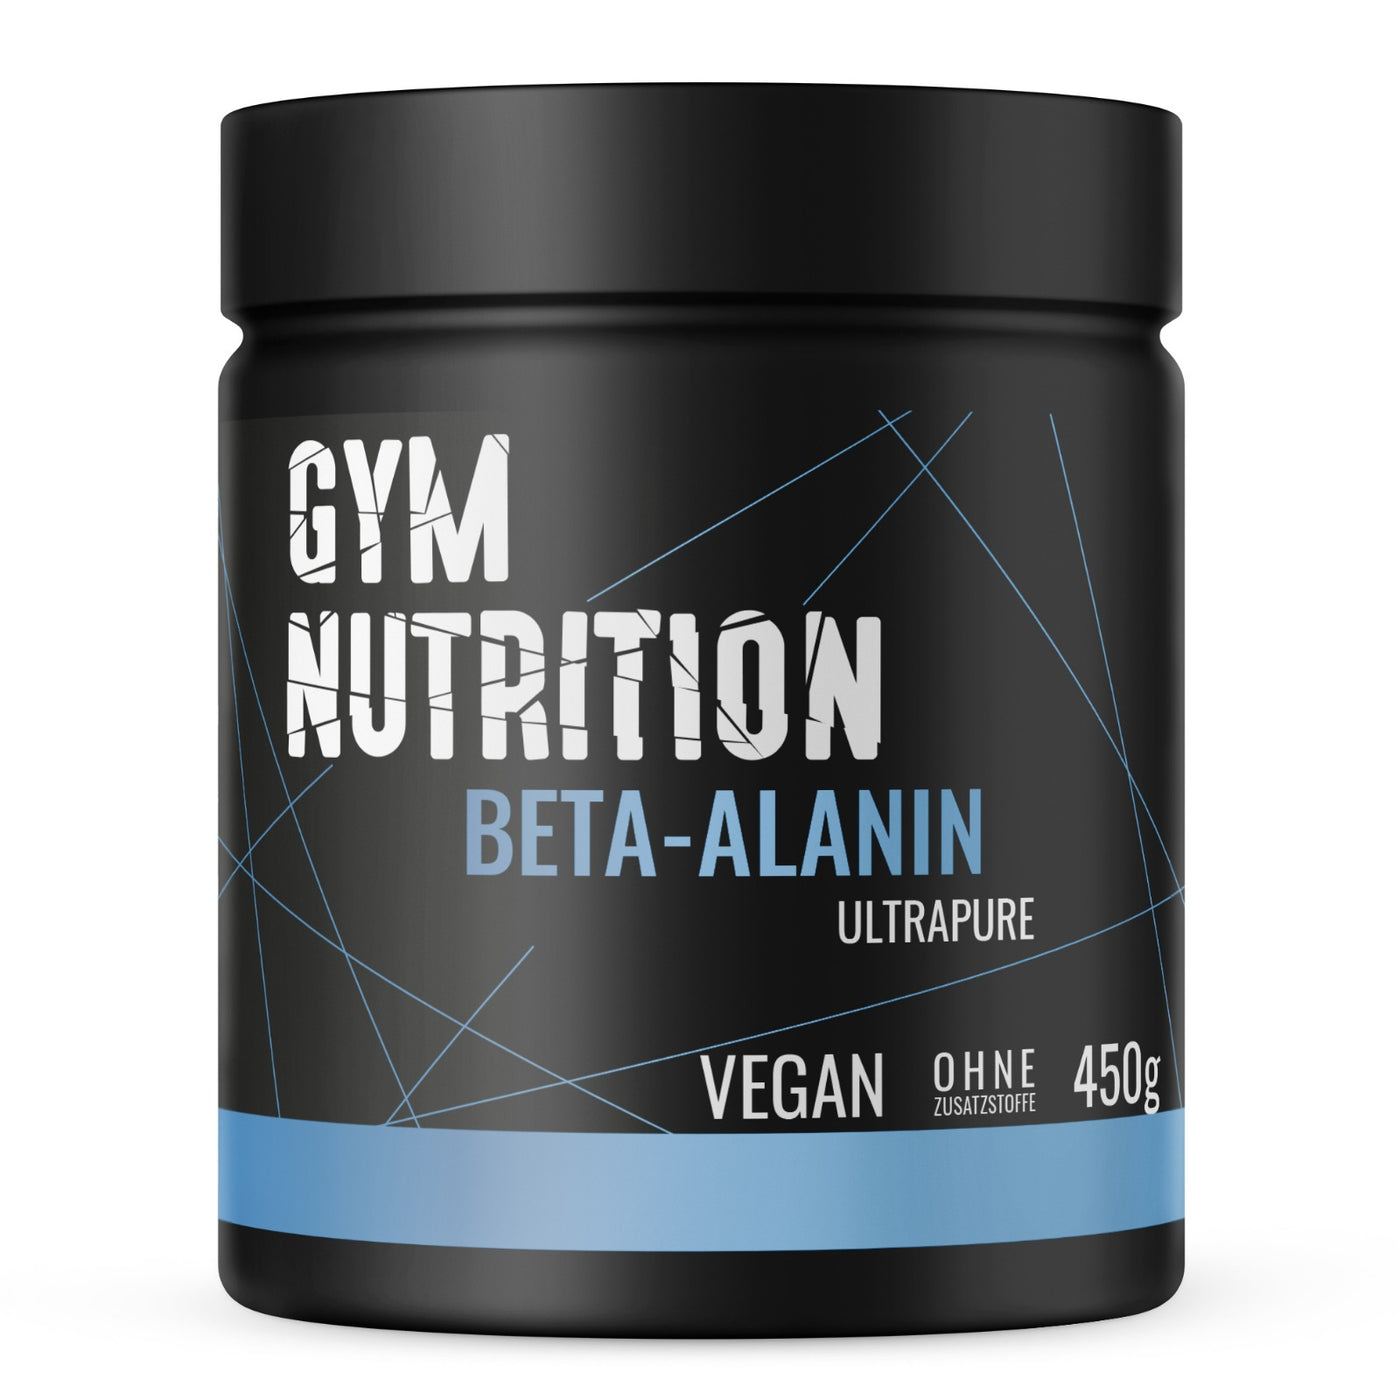 Premium Beta Alanine - High dosage - Vegan - No additives - 99% purity - Laboratory tested - Popular with athletes - Bottled in Germany